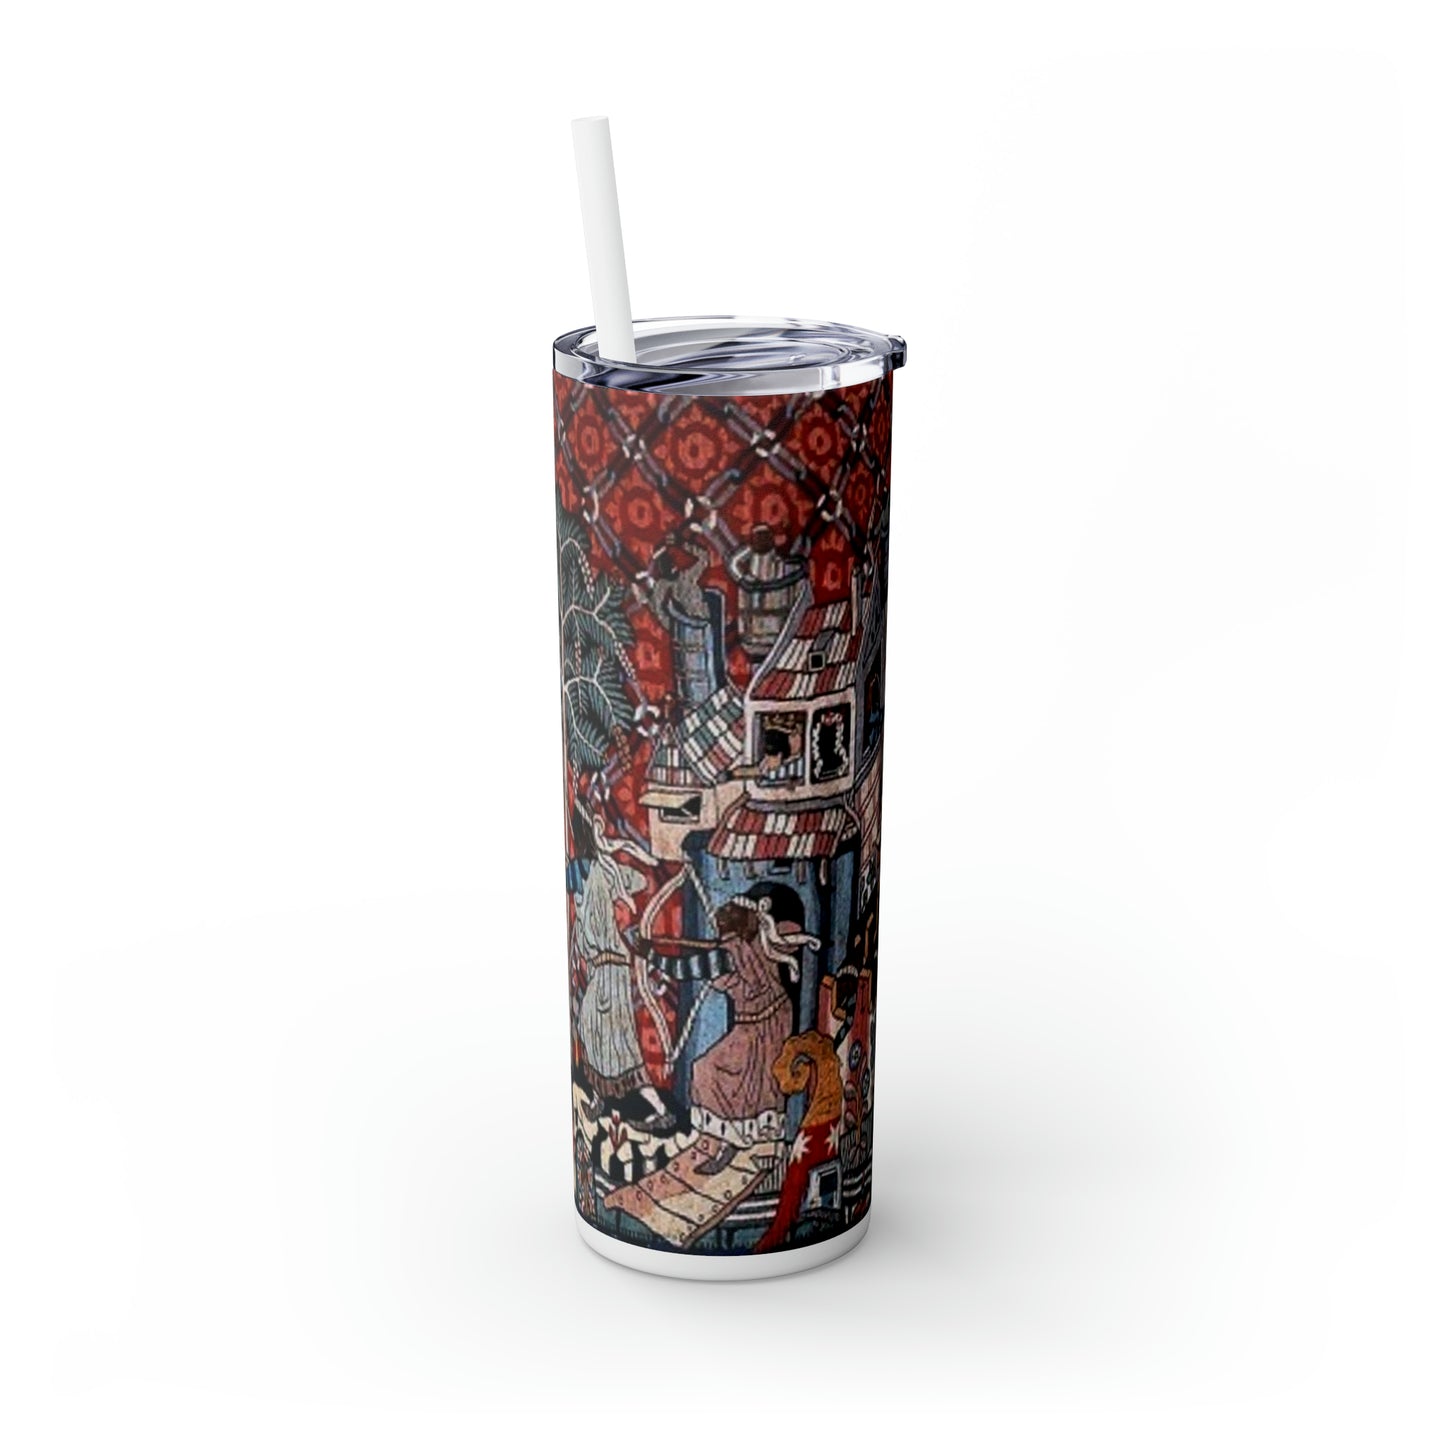 Wild Men Attack The Stronghold of The Moorish Castle-Skinny Tumbler with Straw, 20oz